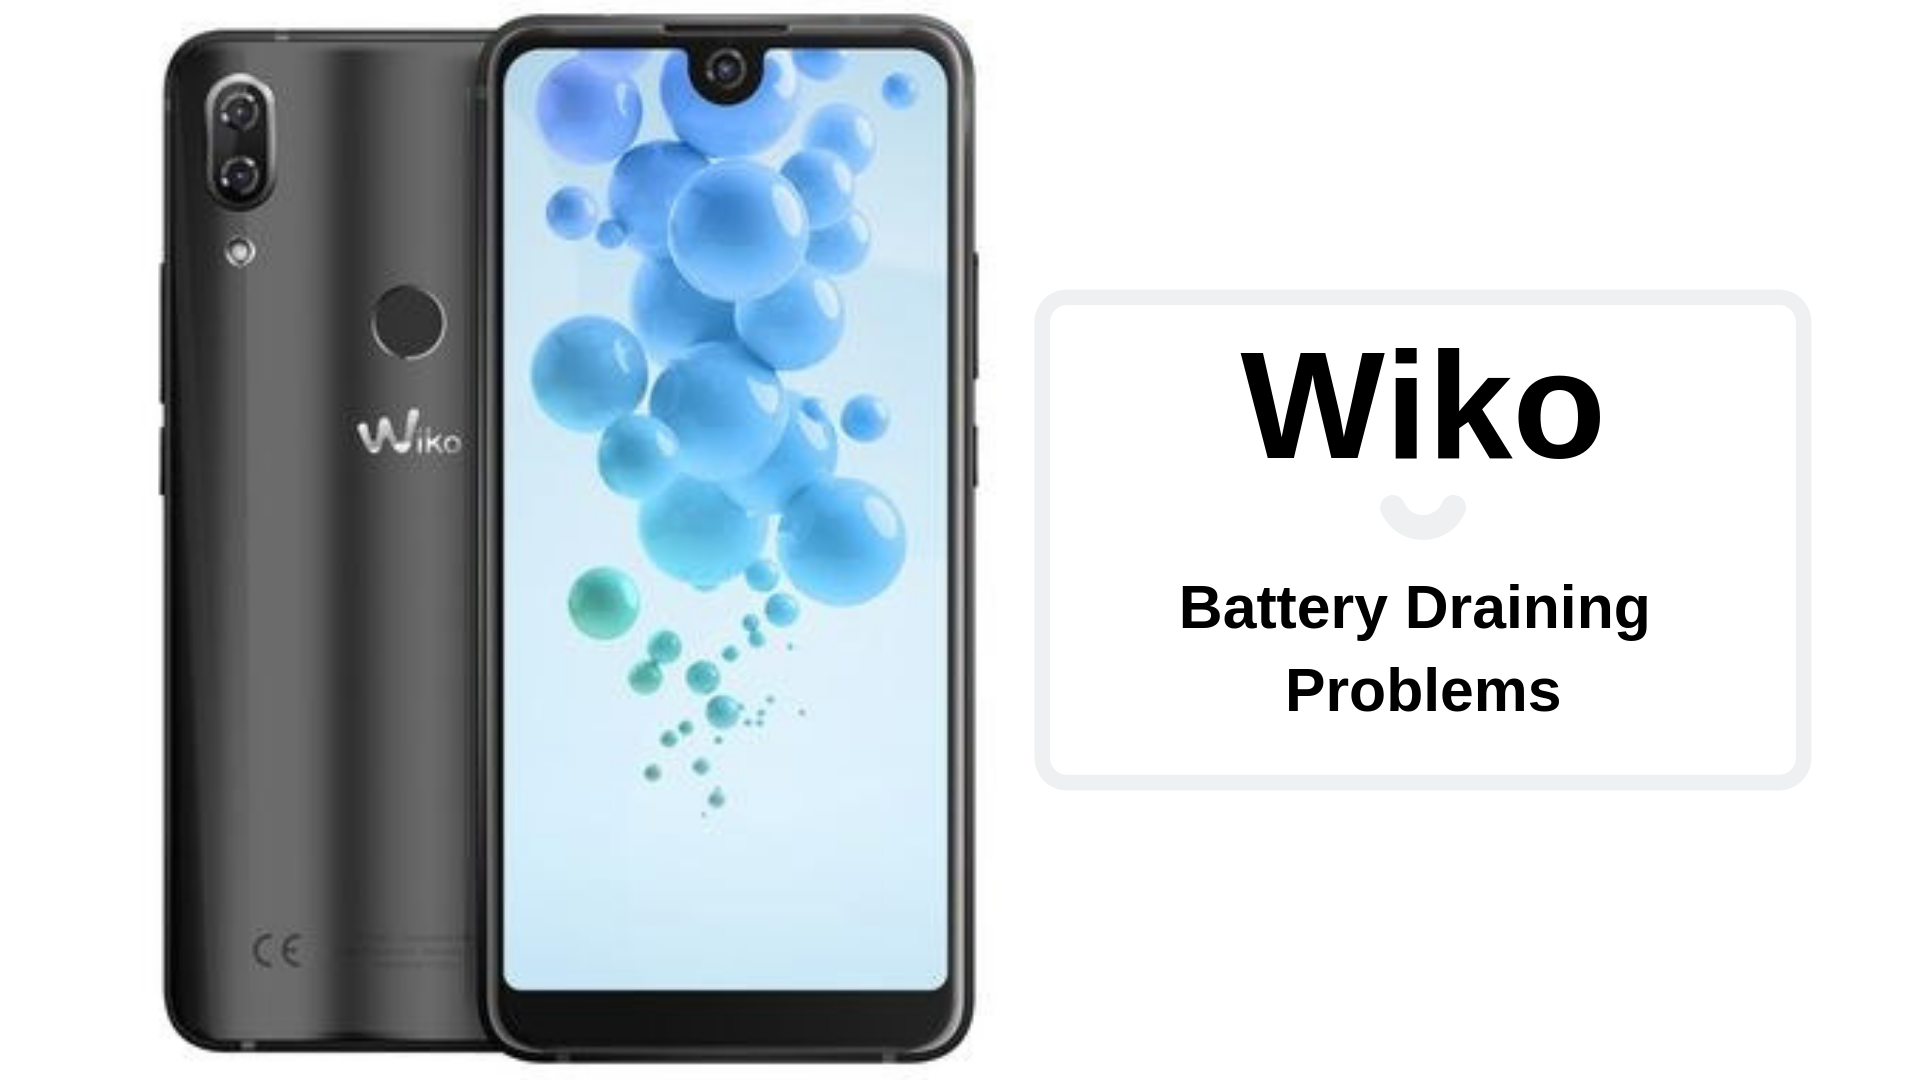 How Fix Wiko Battery Draining Problems - Troubleshooting and Fixes